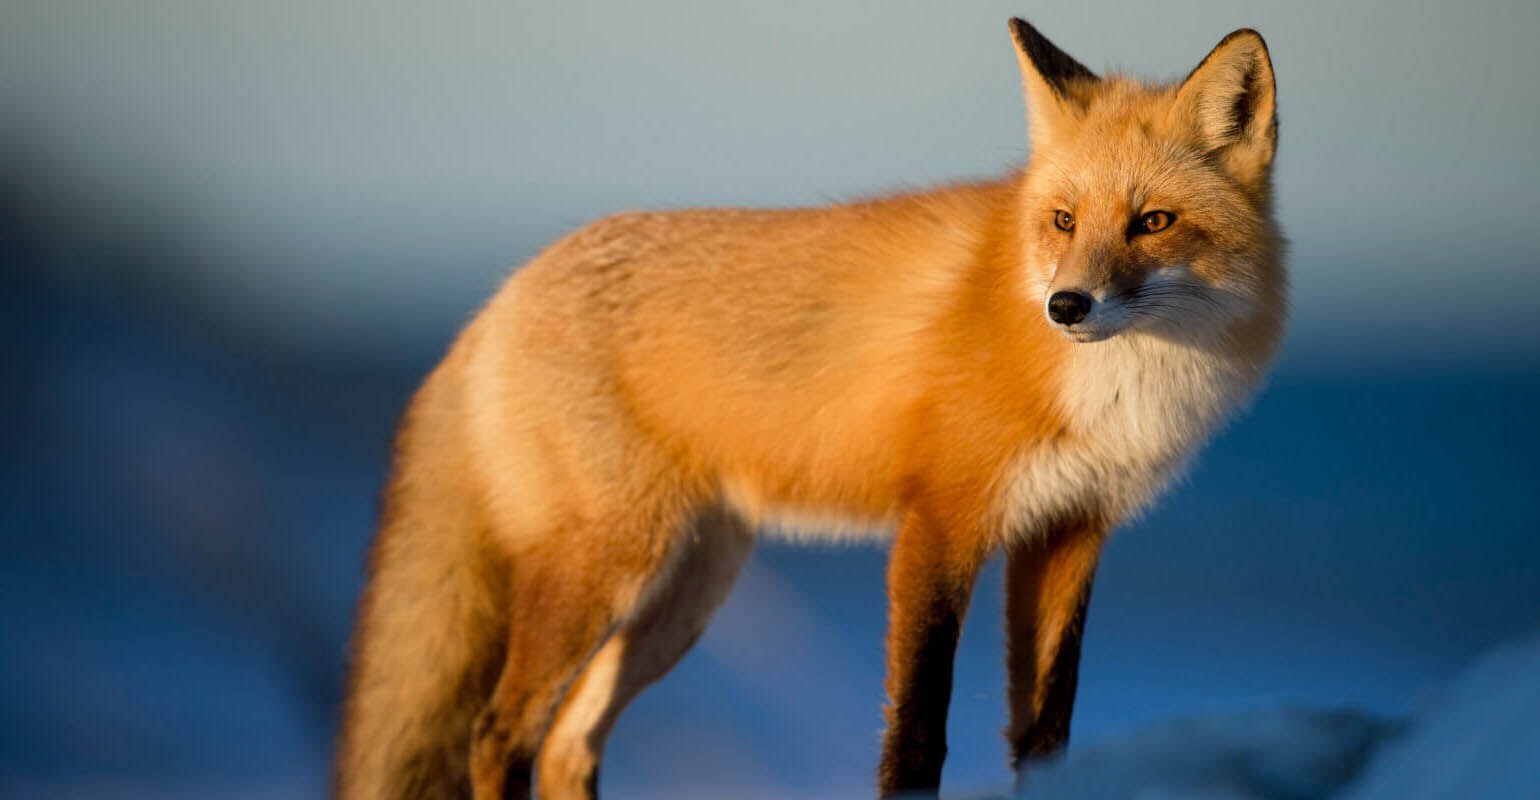 A clear, upscaled photo of fox enhanced with Fotor's image upscaler